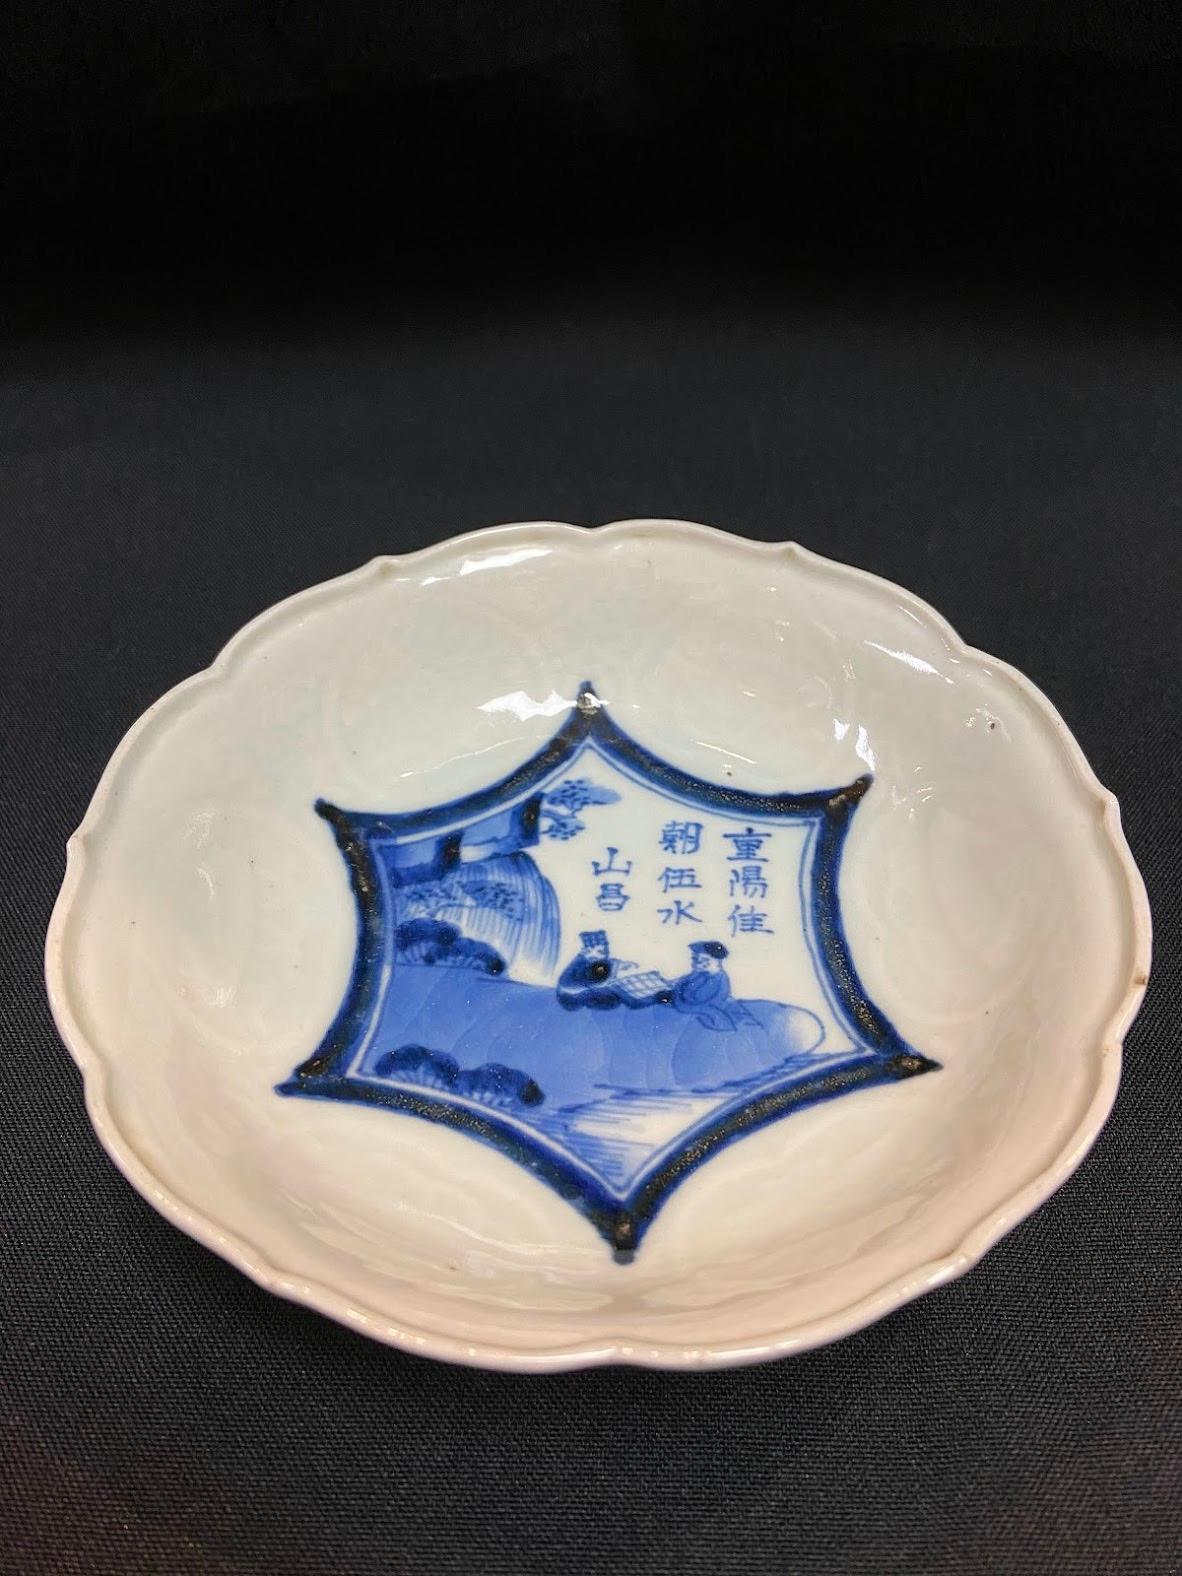 Qing, Yongzheng period blue and white poem decoration porcelian fluted-rim plate/ ?,?? ??????? (??)18????
Condition: Shows normal sign of wear and use, No damage or crack. 
Material: blue and white porcelain
Approximate size: H:4cm, Diameter:14.5